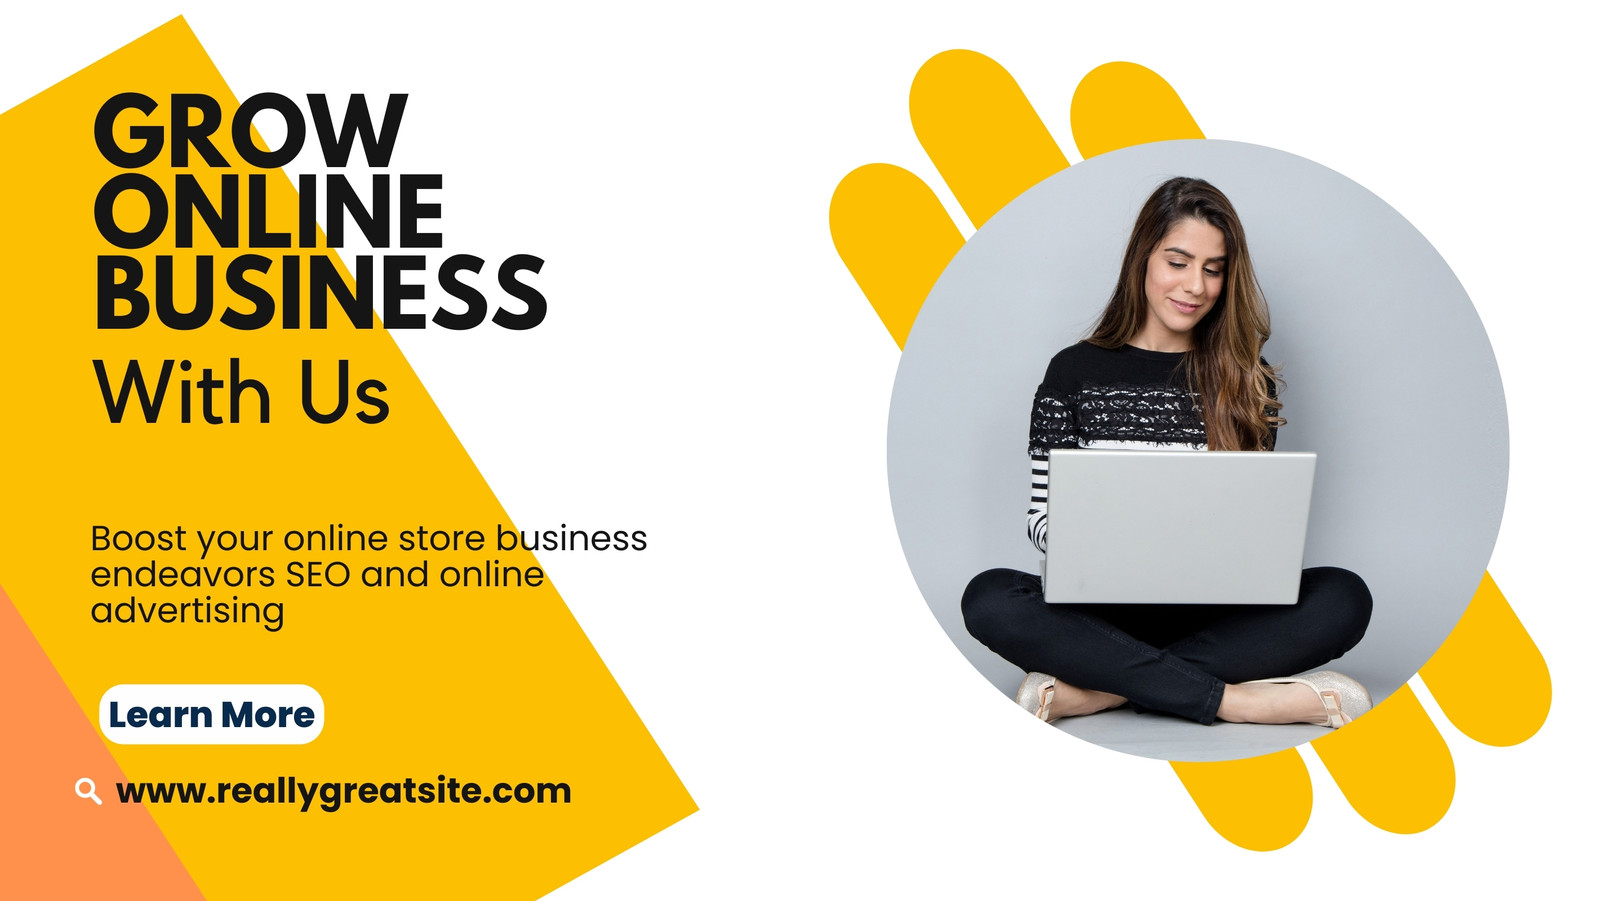 Free business Facebook cover templates to customize | Canva